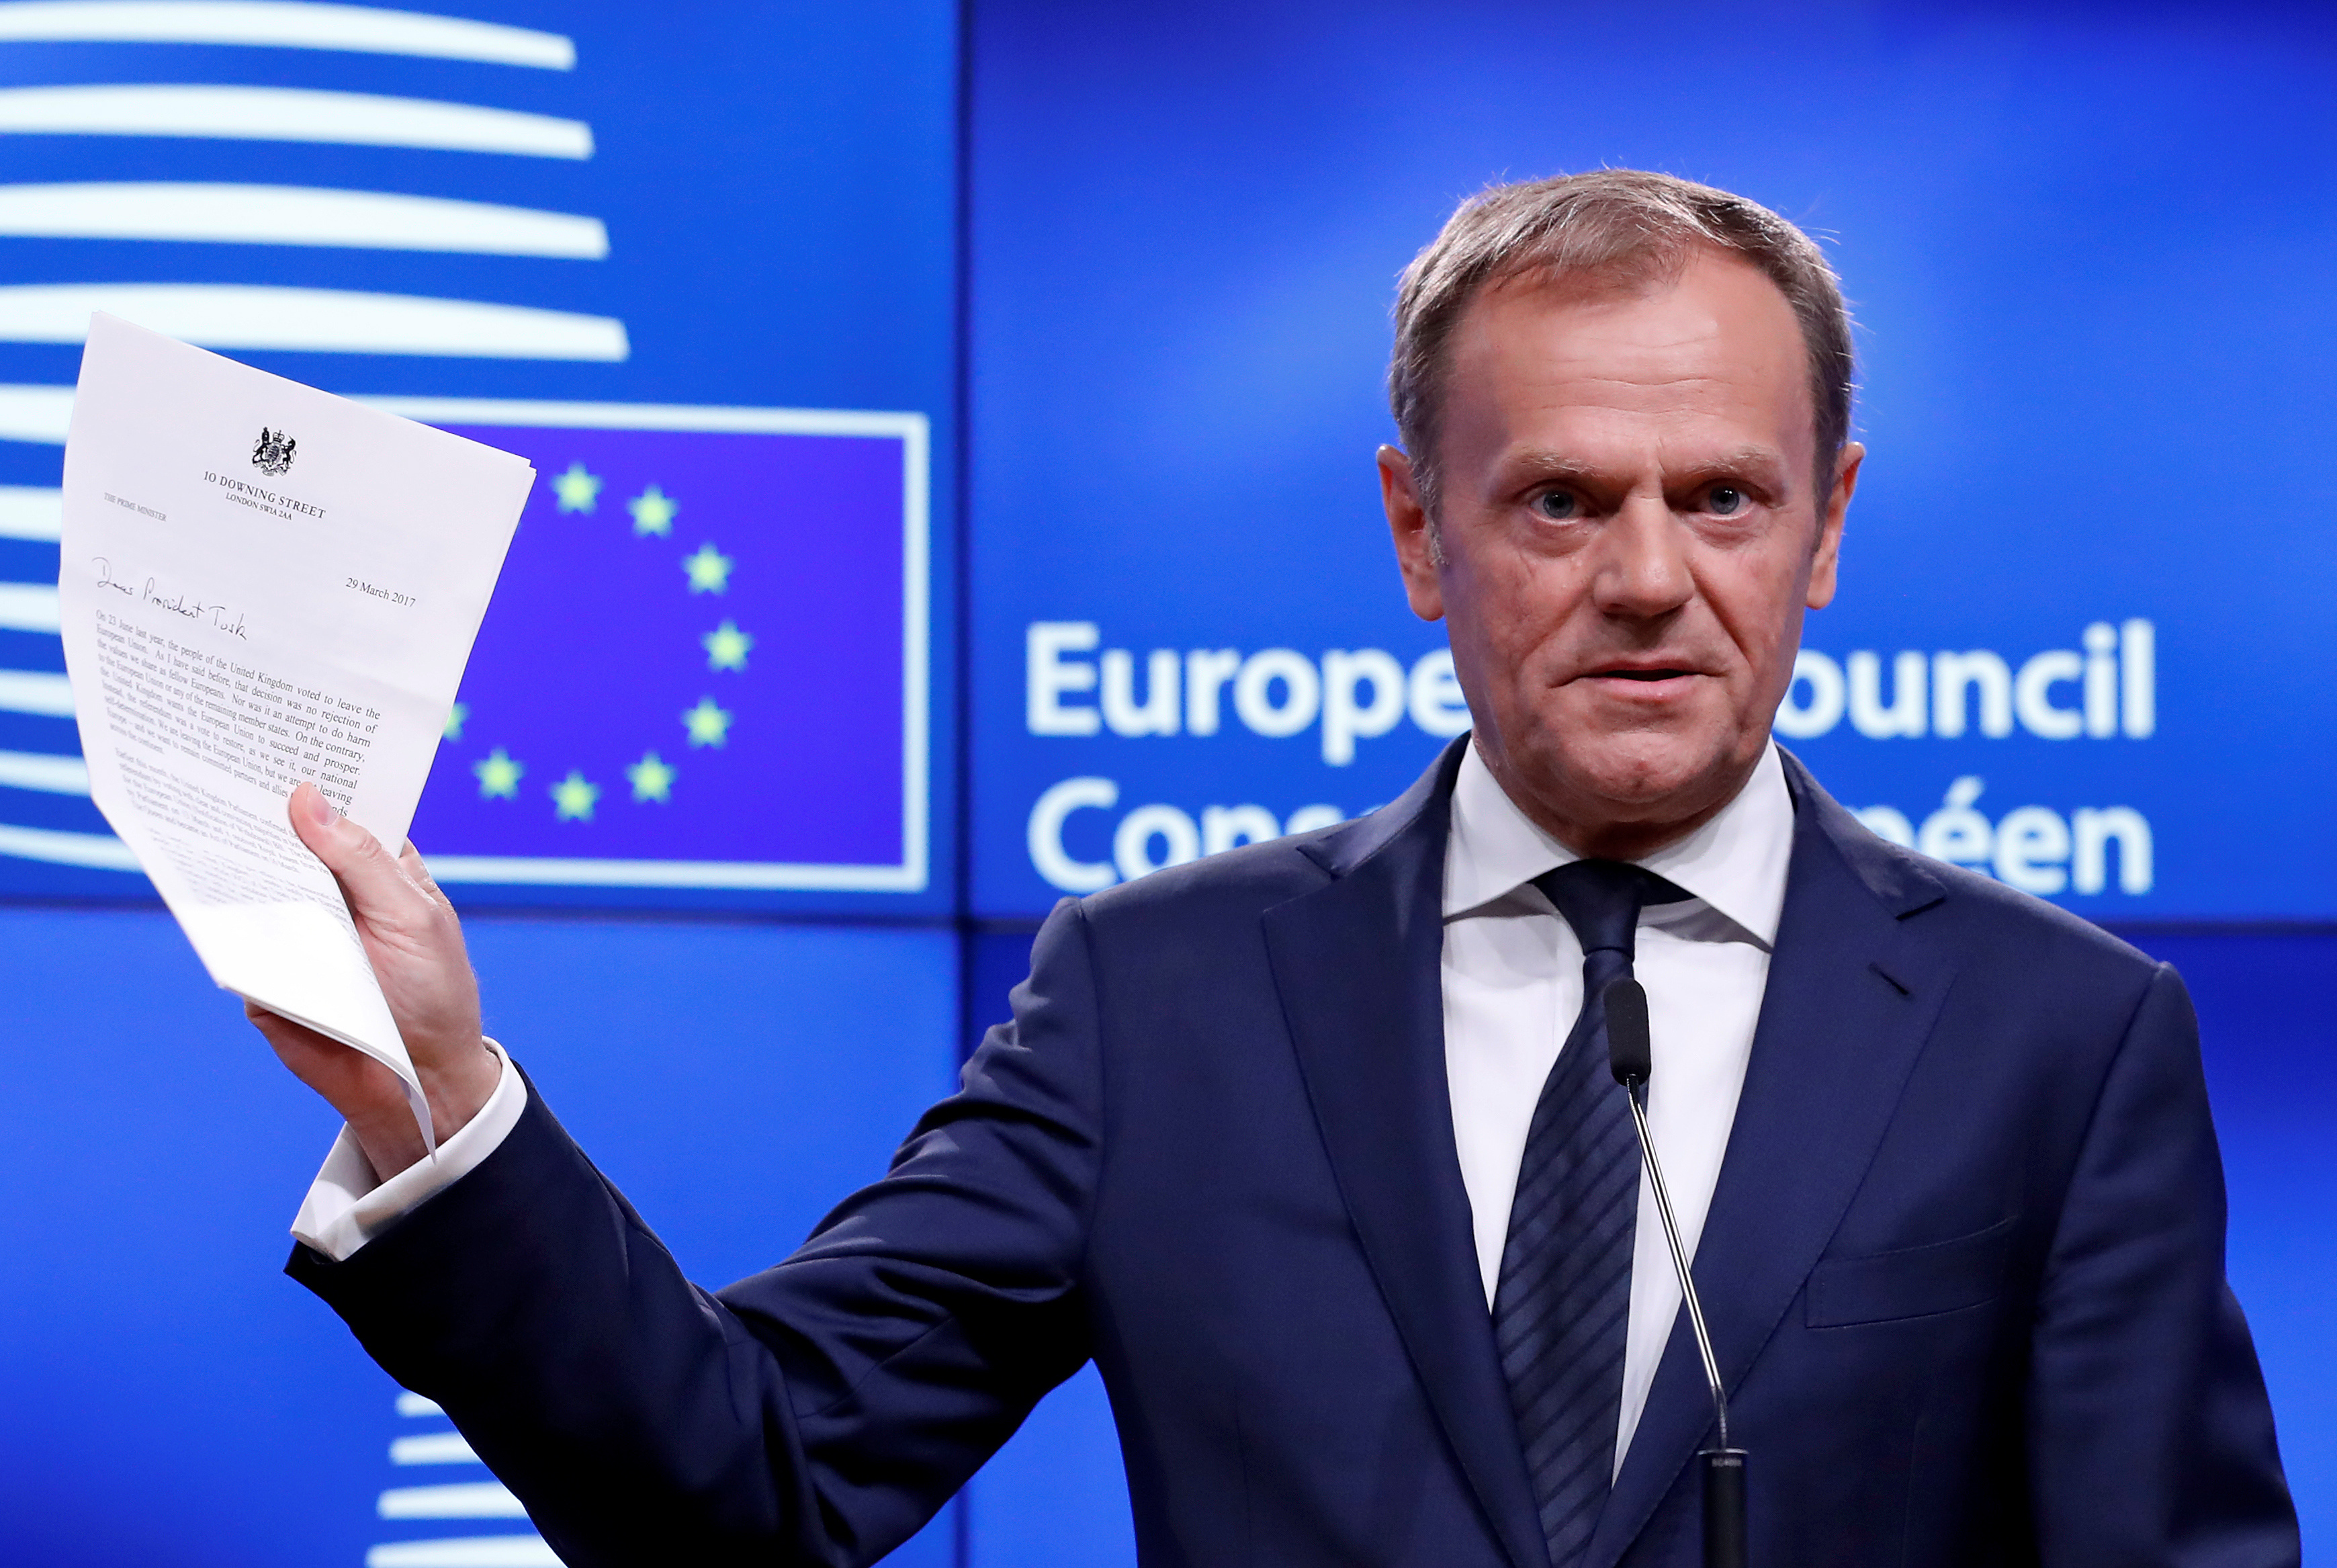 BRUSSELS 2017-03-29 European Council President Donald Tusk shows British Prime Minister Theresa May's Brexit letter in notice of the UK's intention to leave the bloc under Article 50 of the EU's Lisbon Treaty, at the end of a news conference in Brussels, Belgium March 29, 2017. REUTERS/Yves Herman TPX IMAGES OF THE DAY Photo: / REUTERS / TT / kod 72000